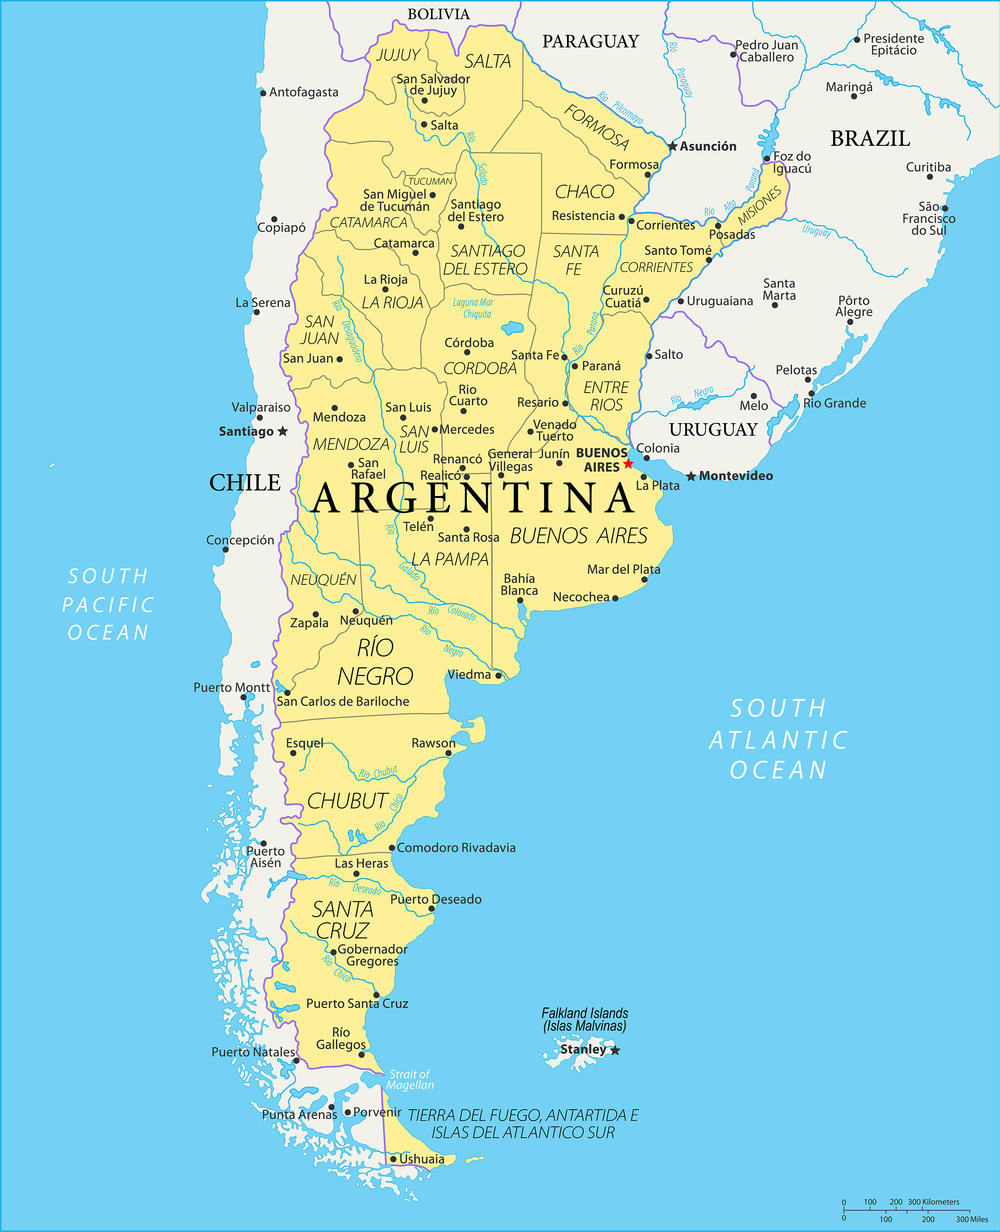 The Falklands, called las Malvinas by Argentines, are located off the Eastern coast of Argentina.